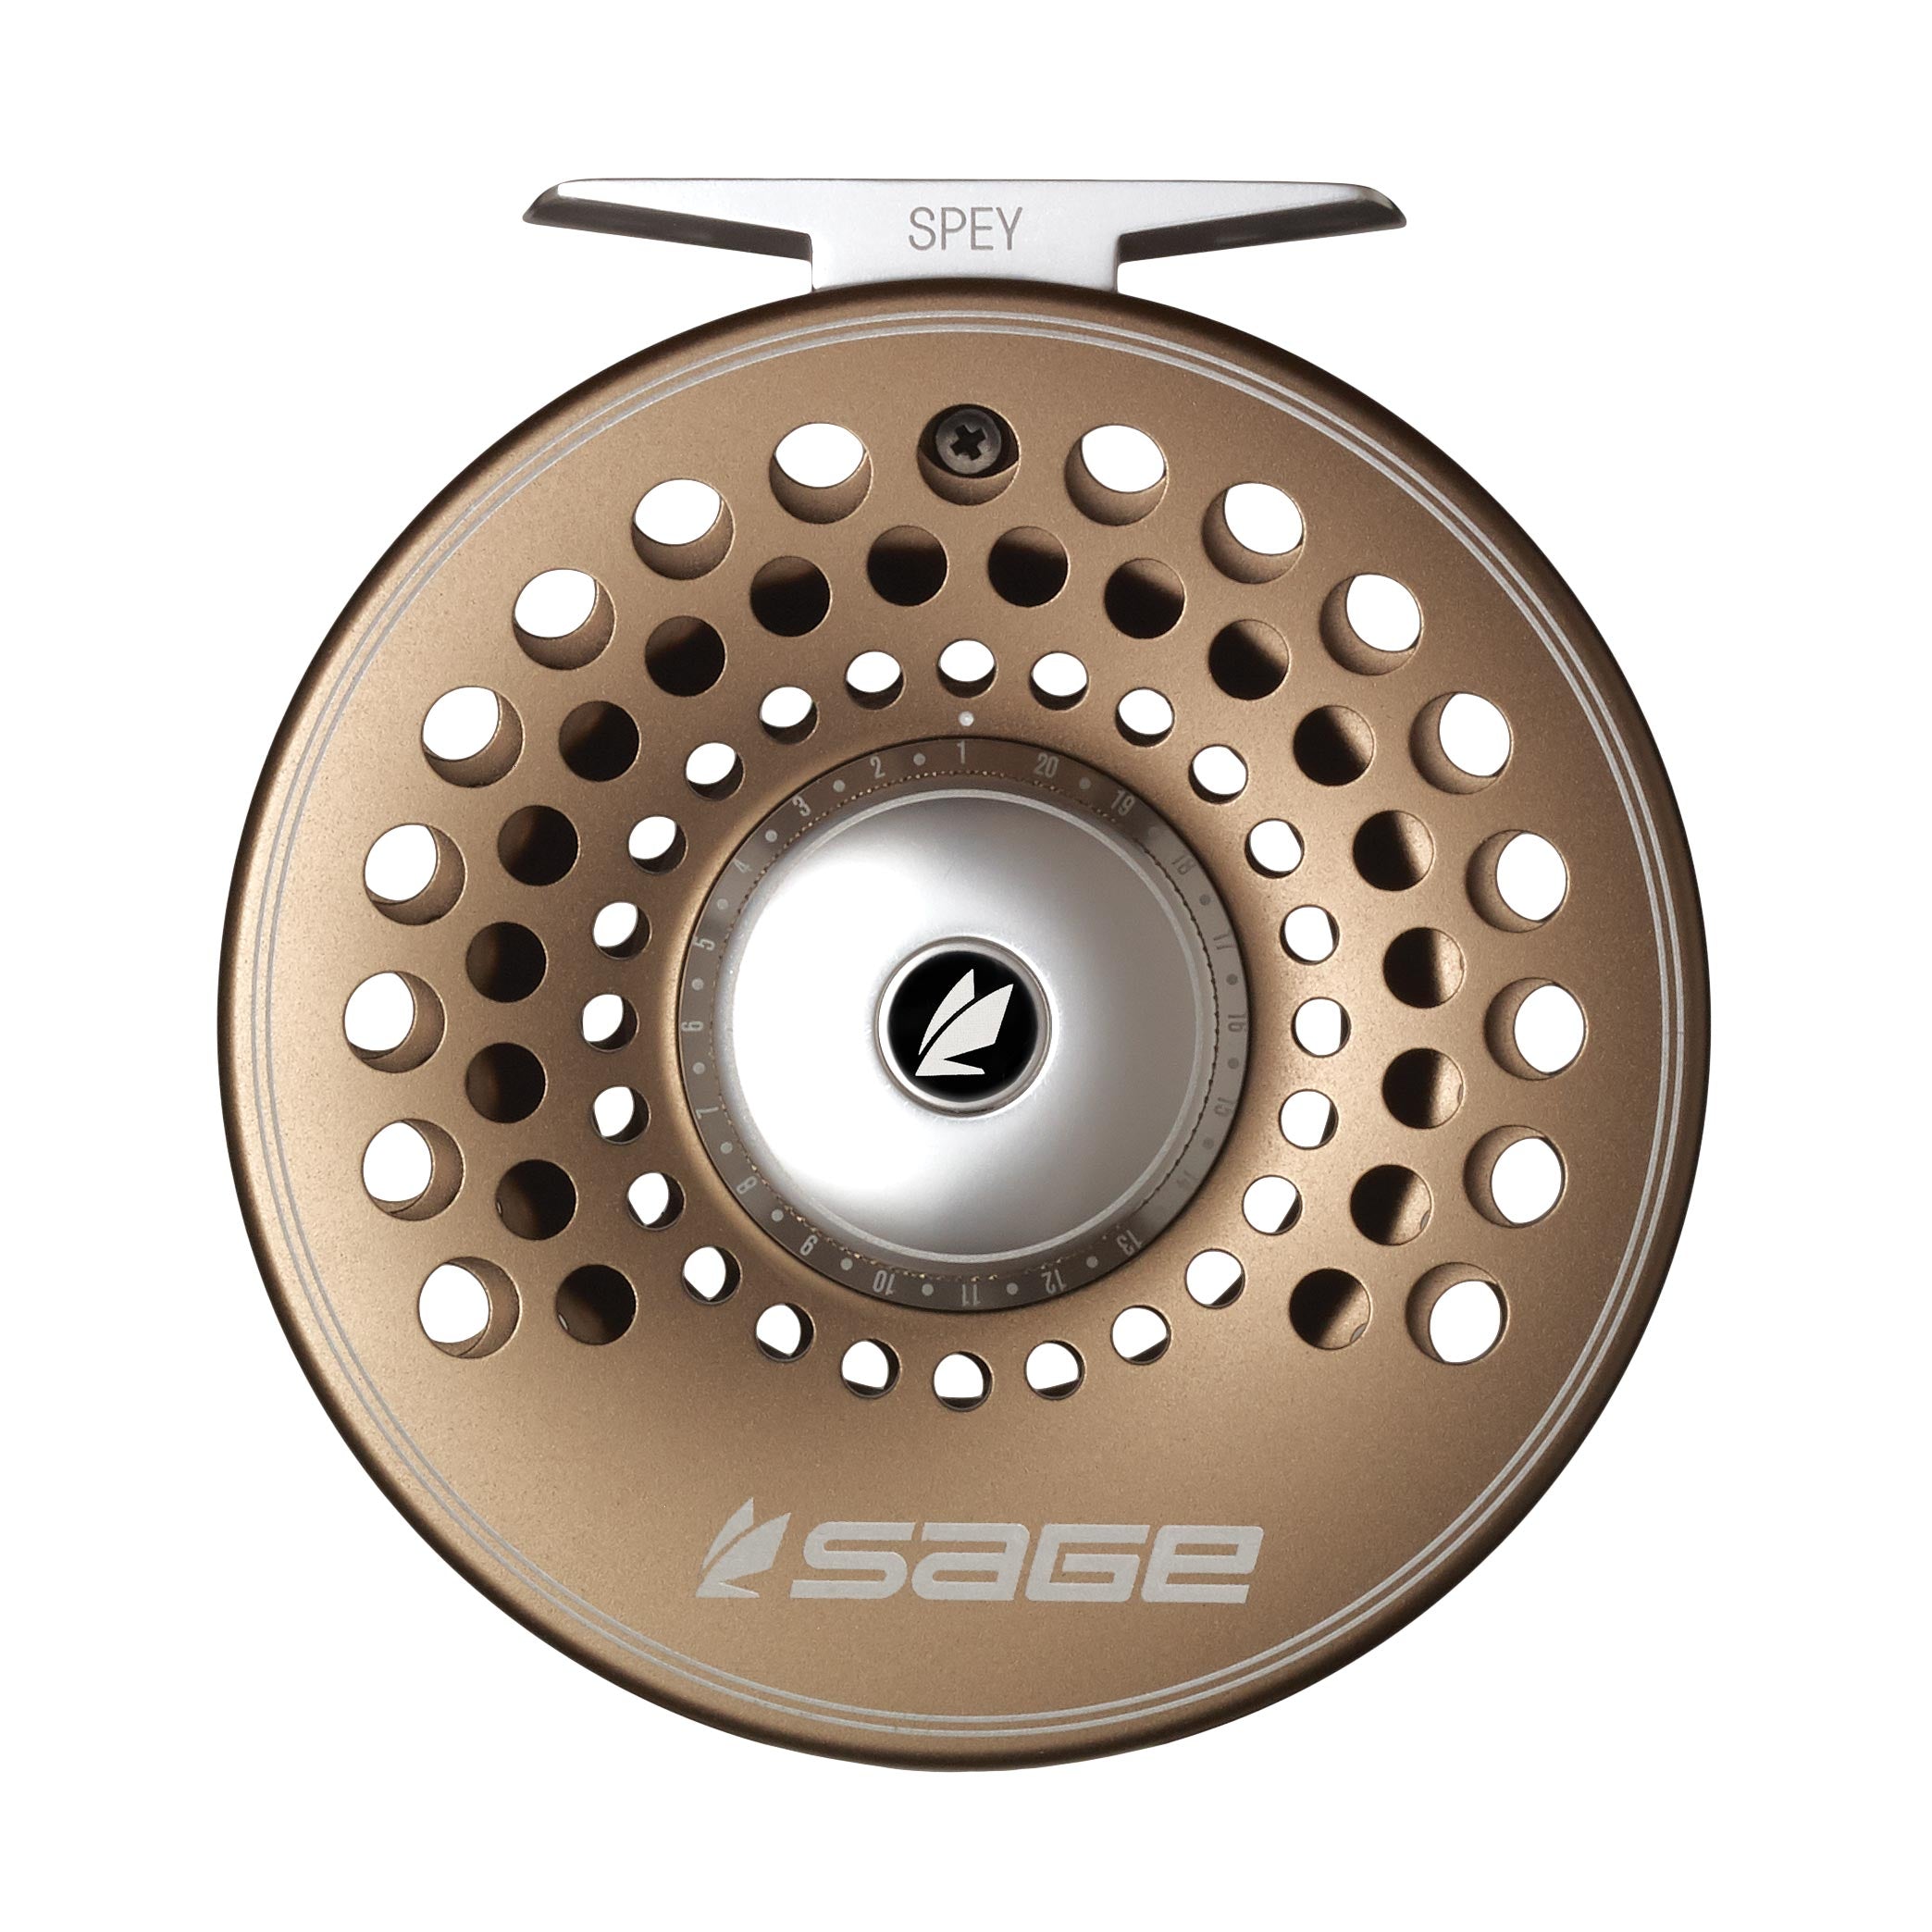 Sage SPEY Fly Reel in Bronze - Discontinued